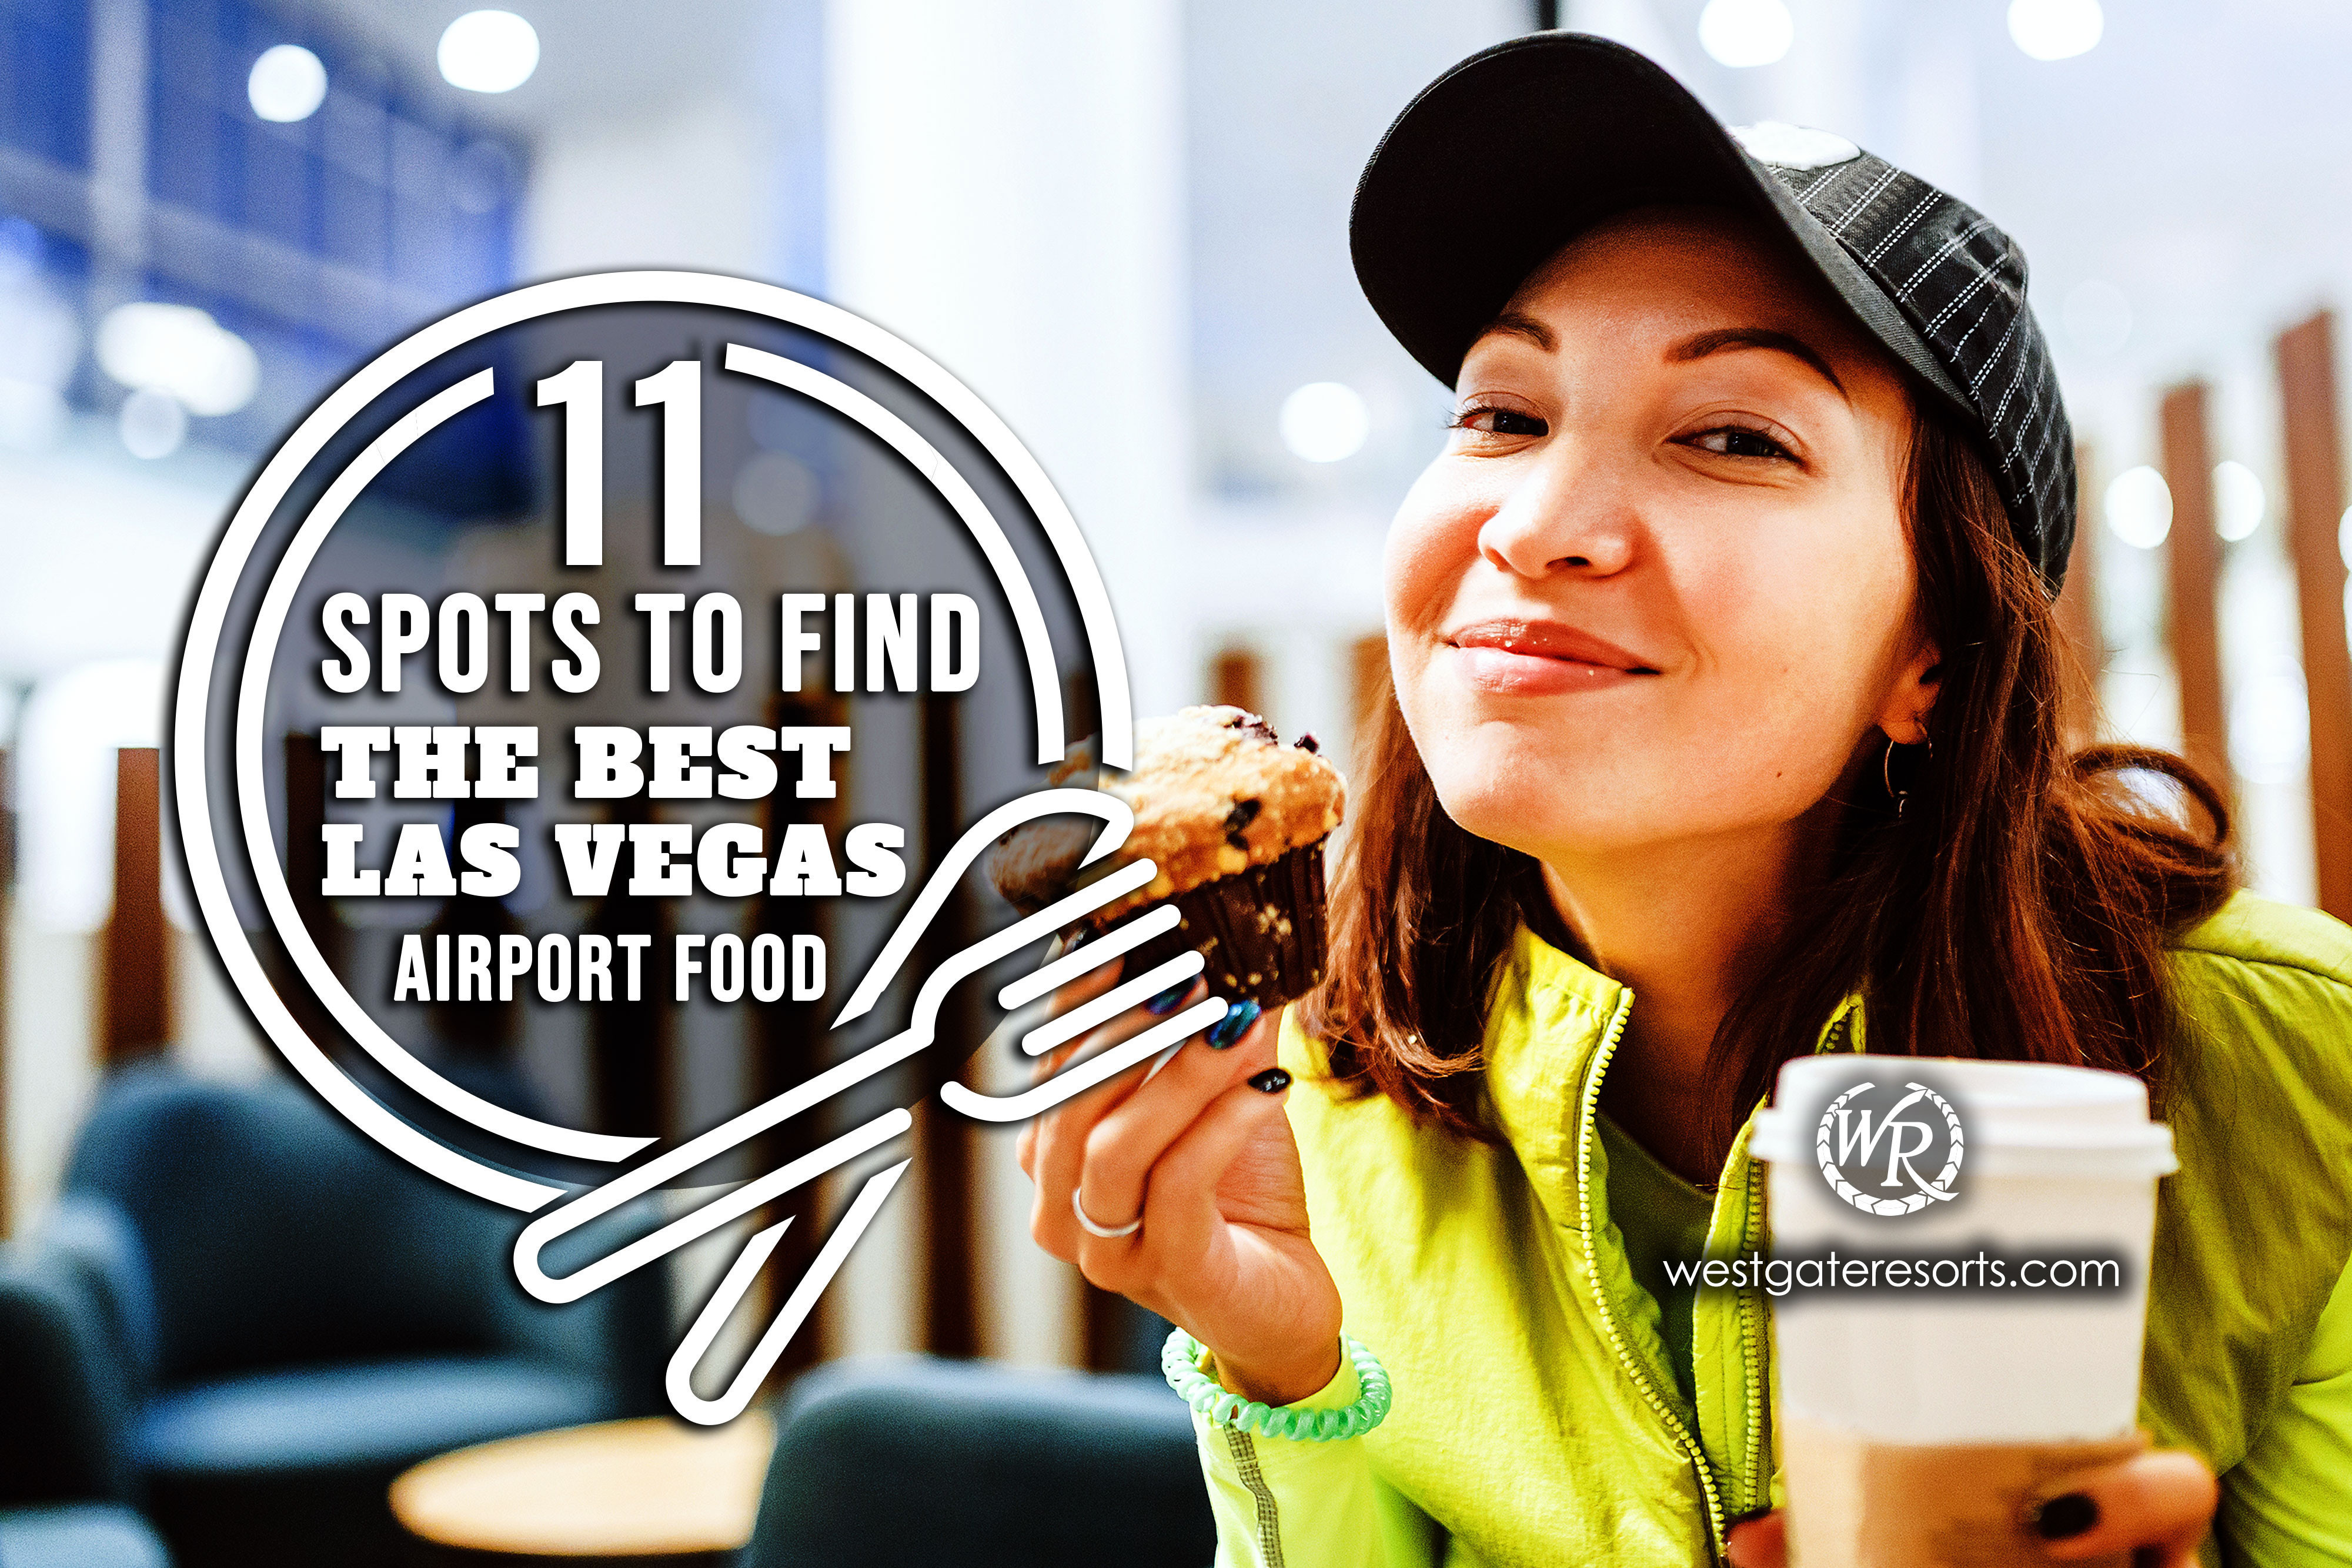 11 Spots to Find the Best Las Vegas Airport Food